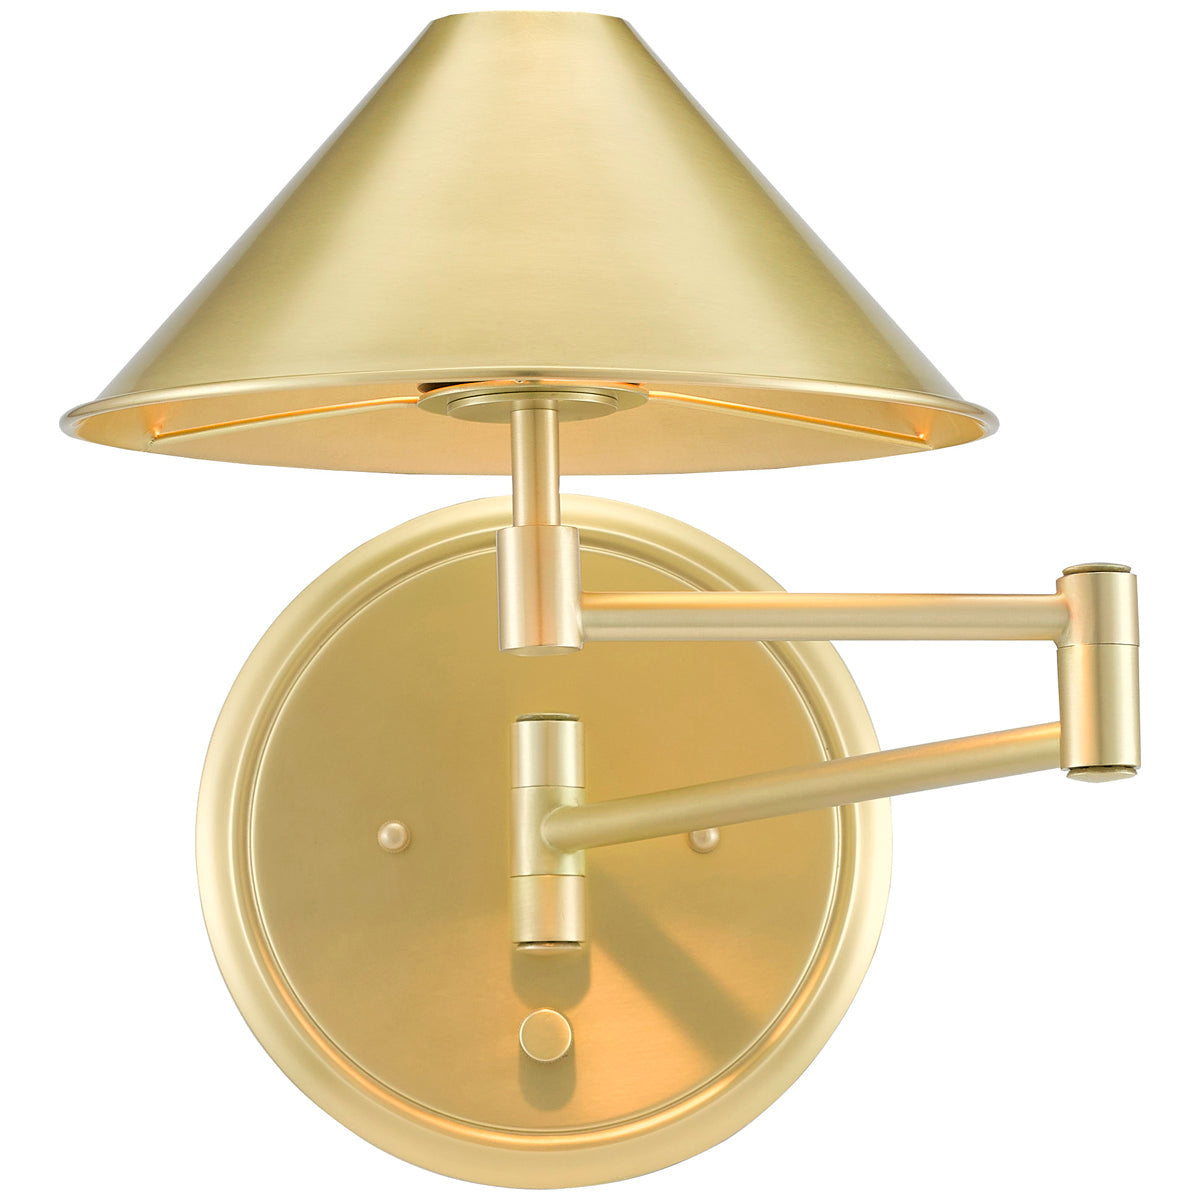 Currey and Company Seton Swing-Arm Wall Sconce